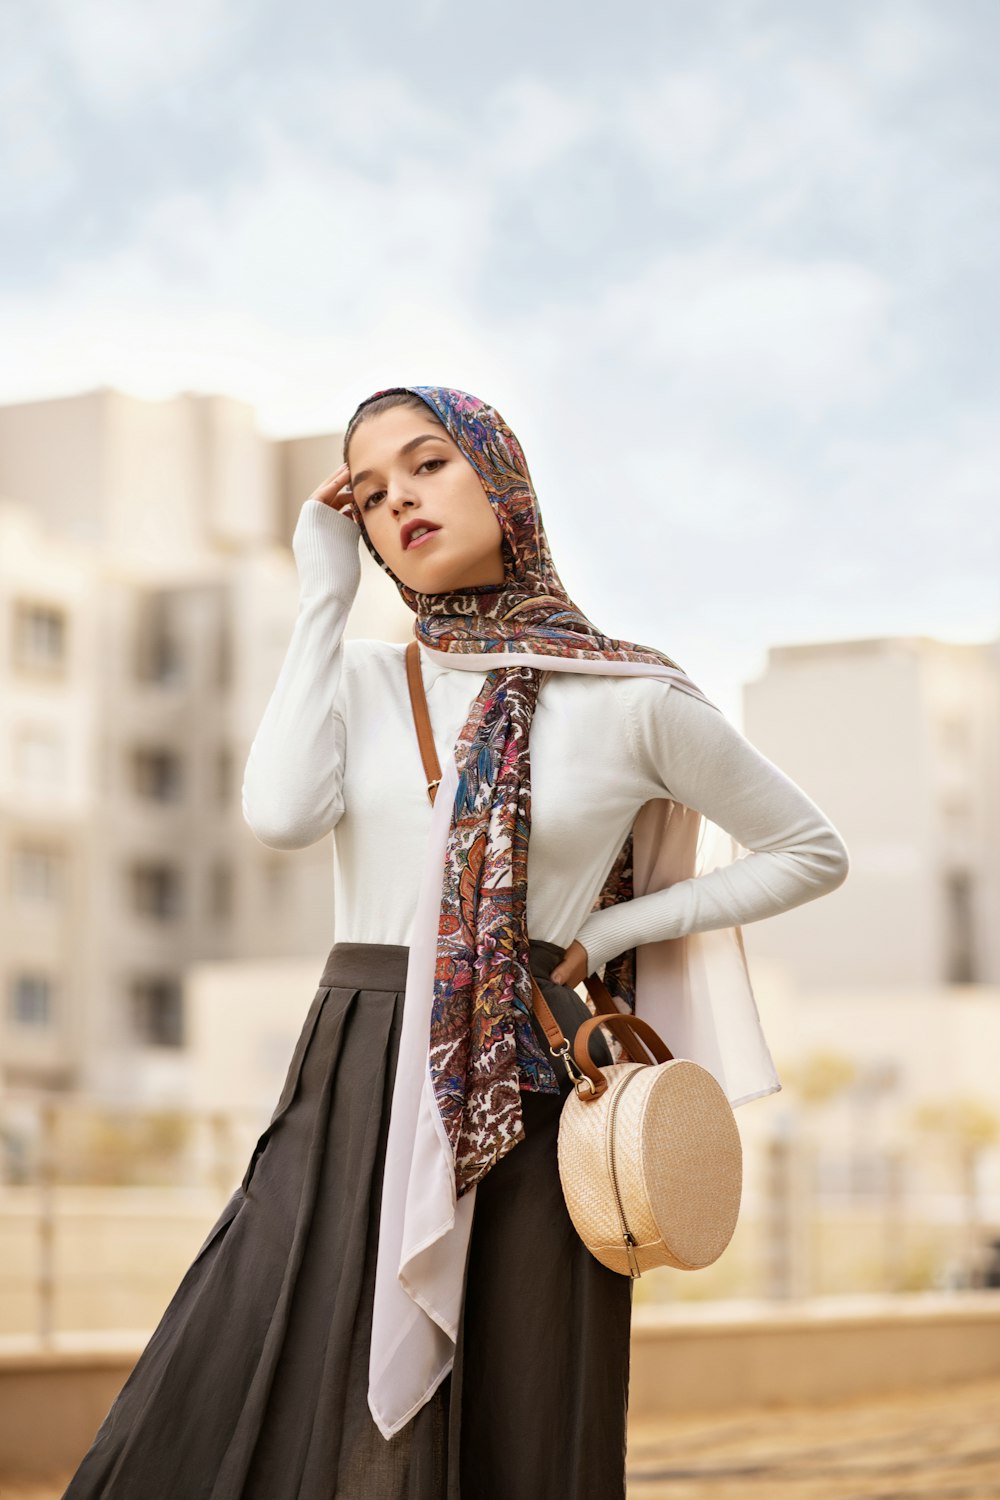 Hijab Fashion Pictures | Download Free Images on Unsplash